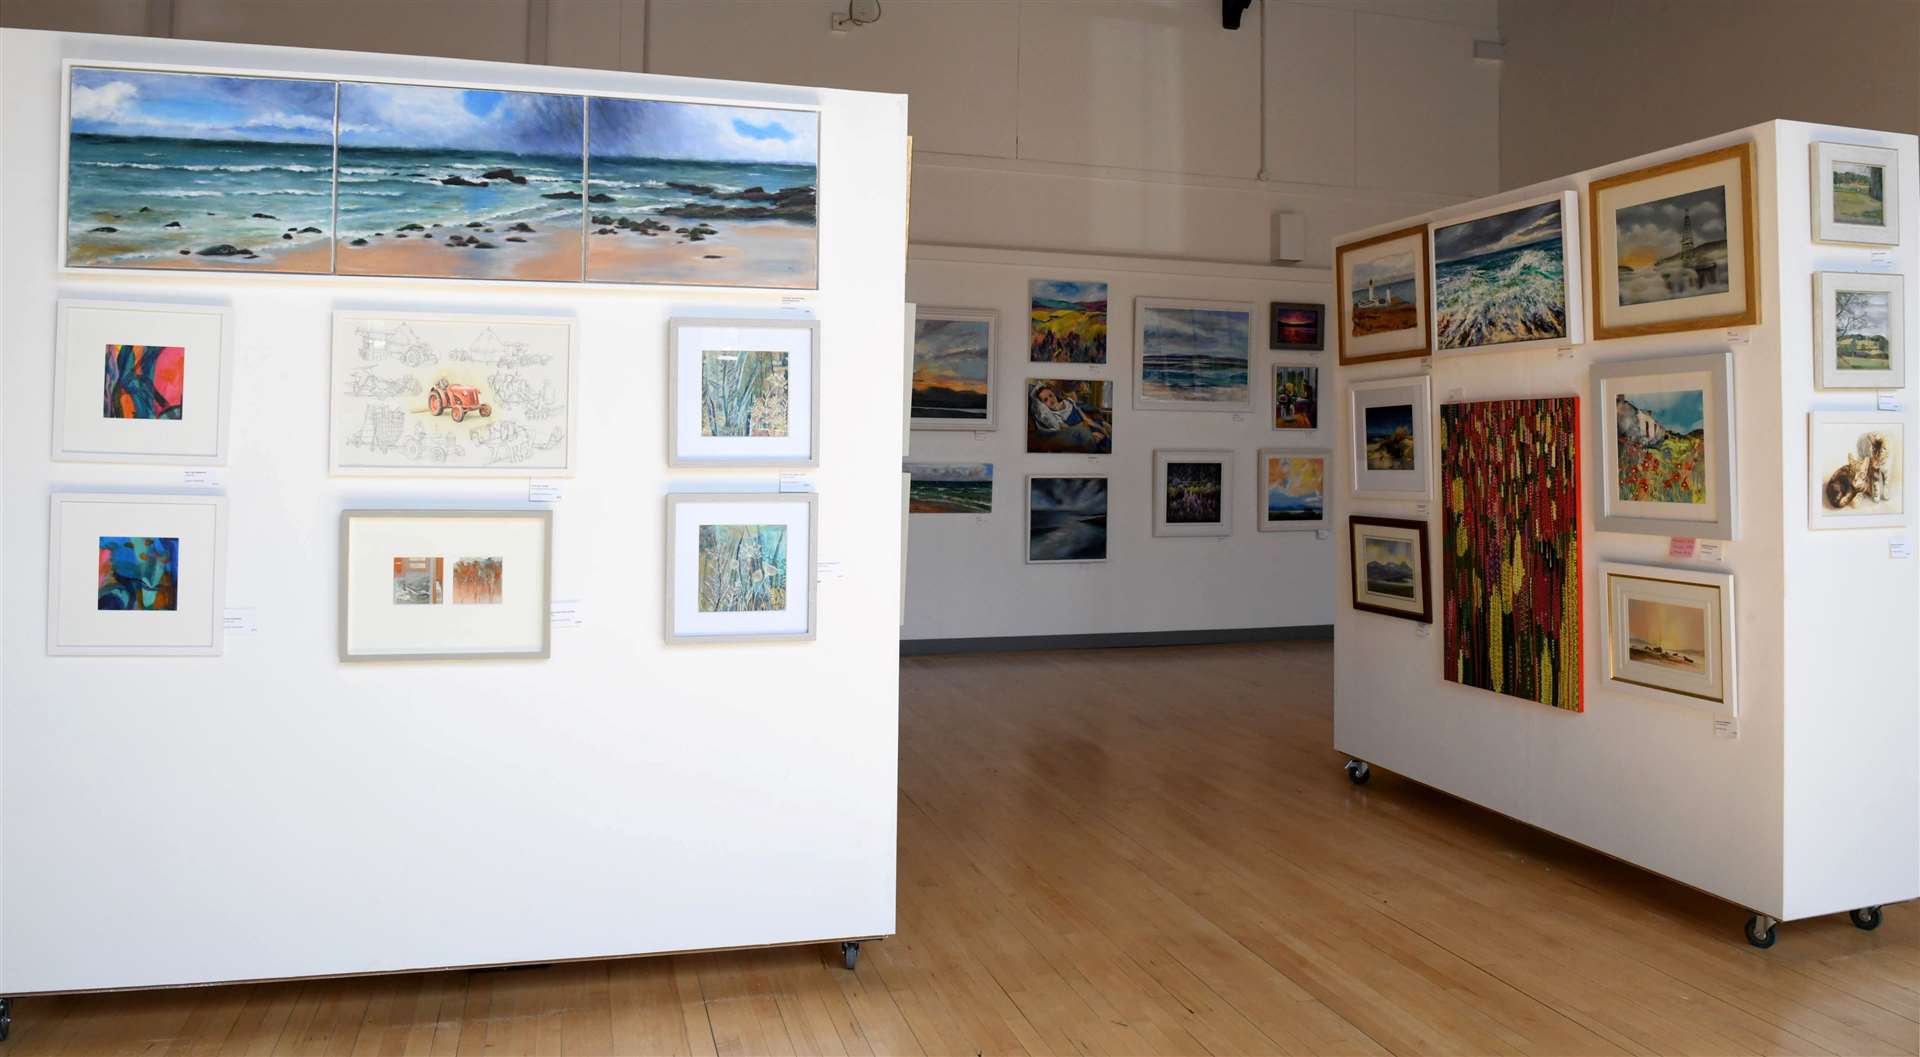 More than 180 paintings are on display at the Inverness Creative Academy.